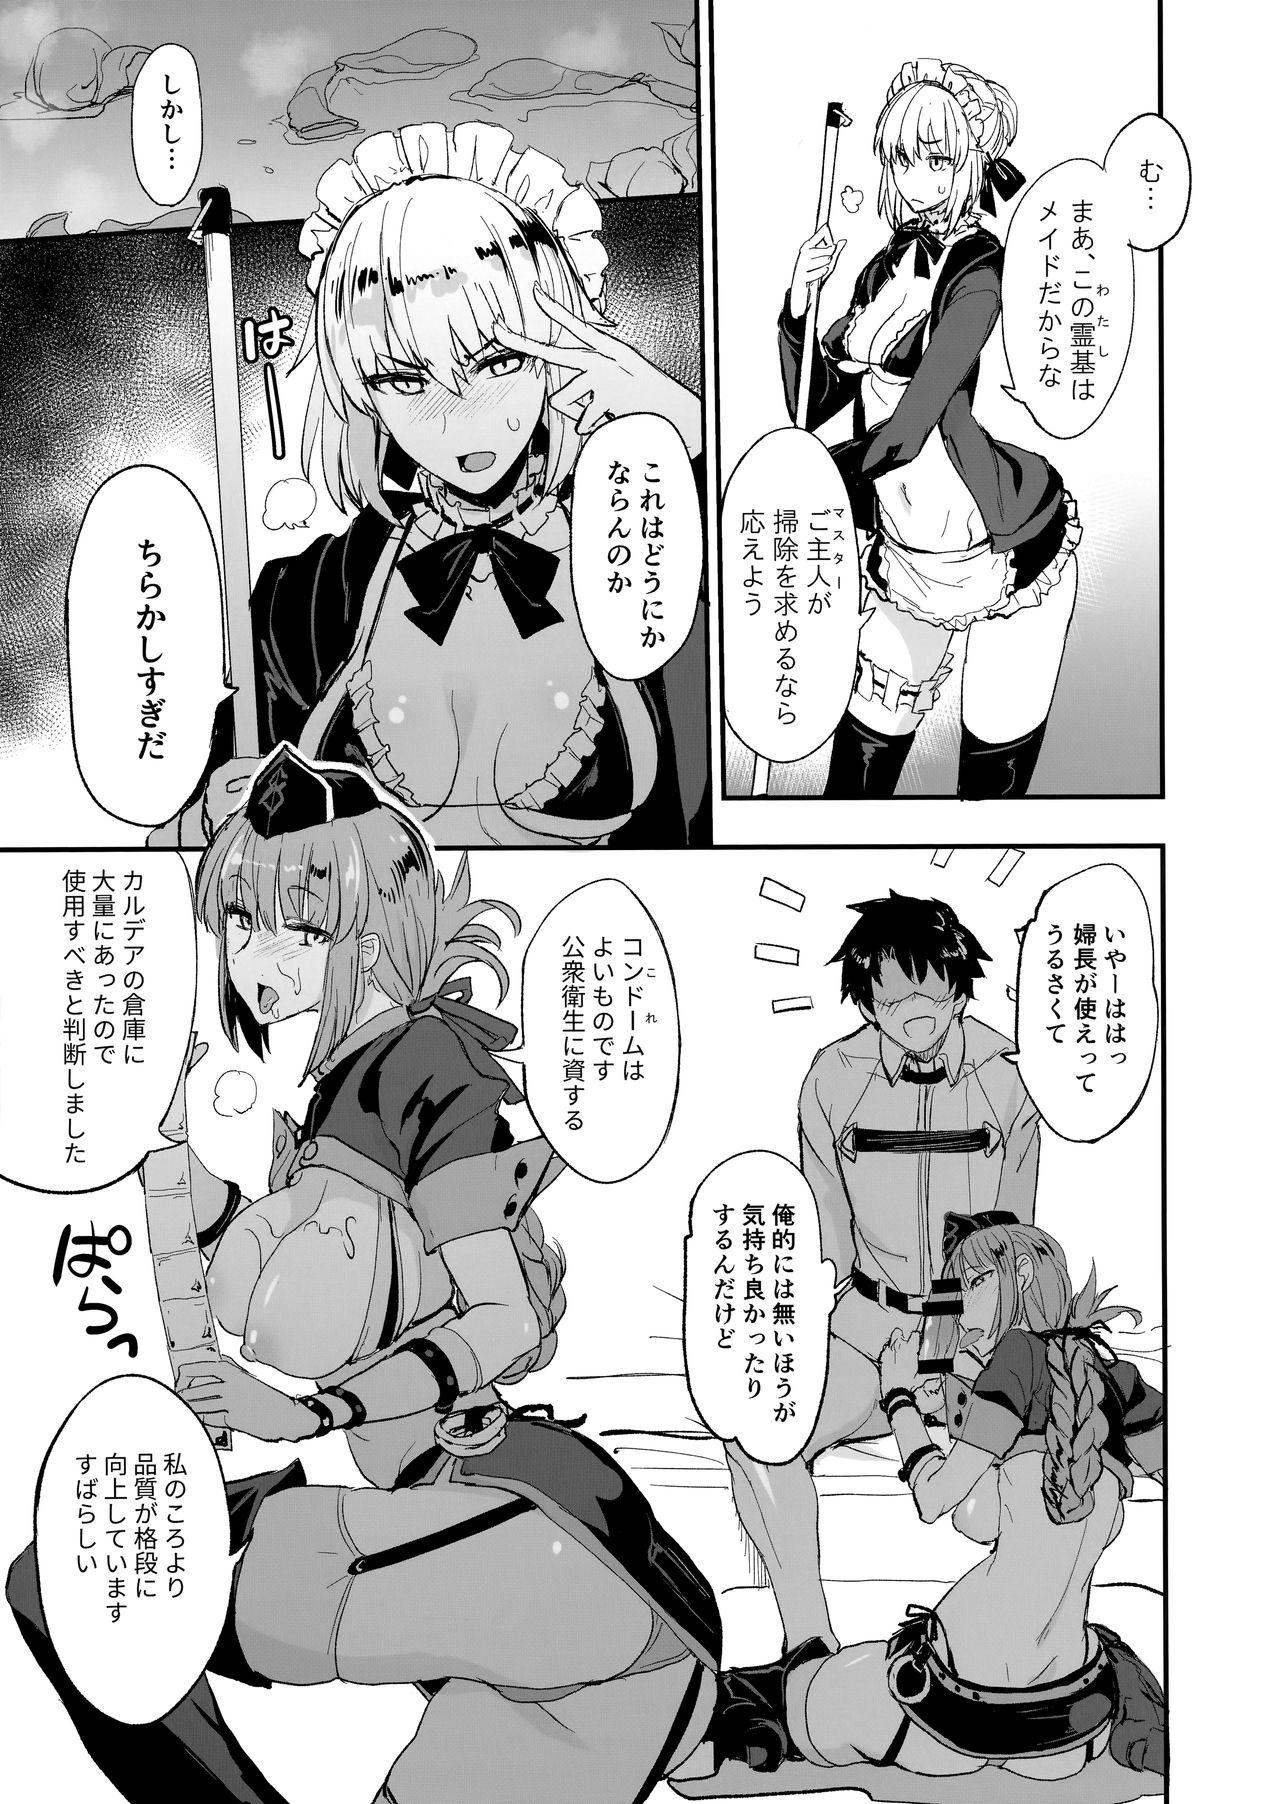 Stepsiblings FGO no Erohon 2 - Fate grand order Doggystyle Porn - Page 6